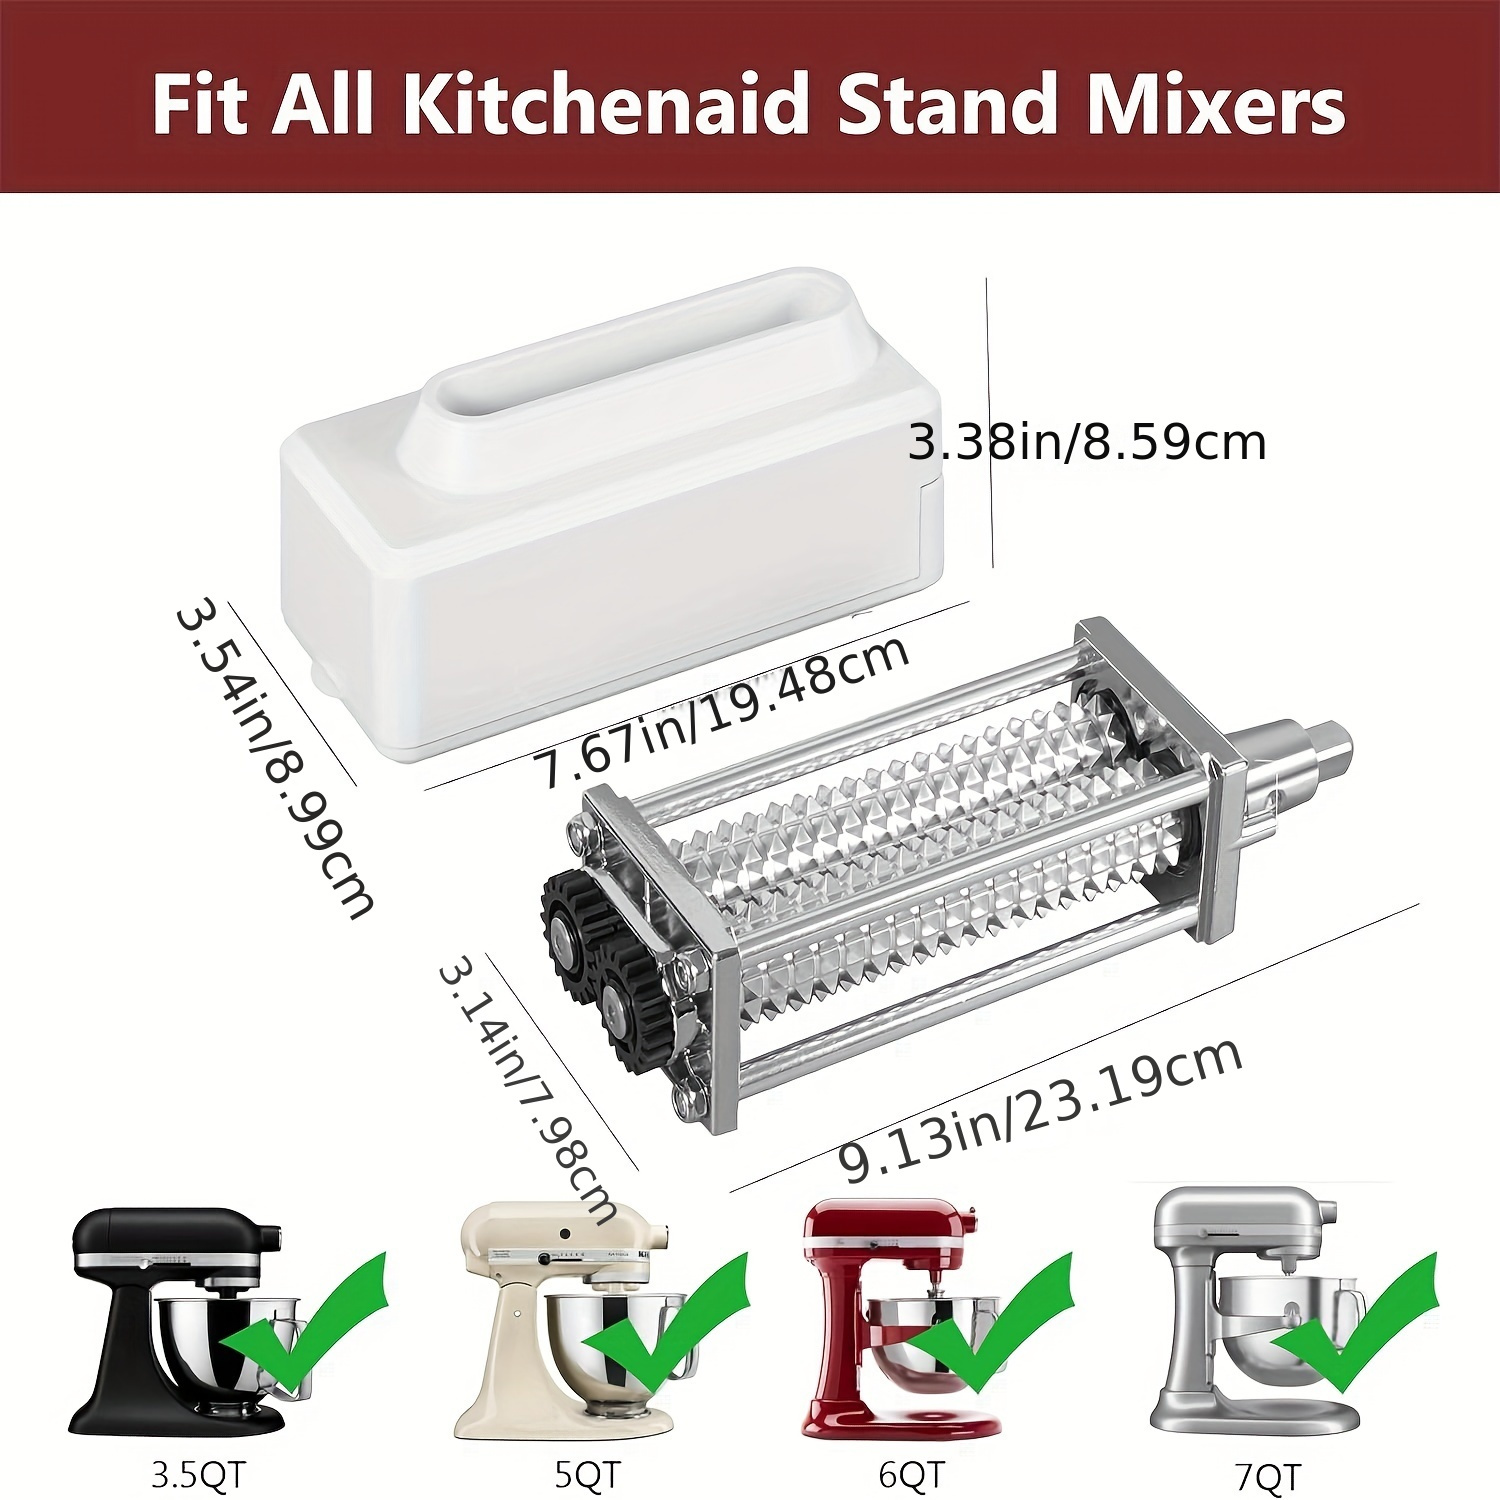 Meat Tenderizer Attachment for Kitchenaid Mixer - Review - Product